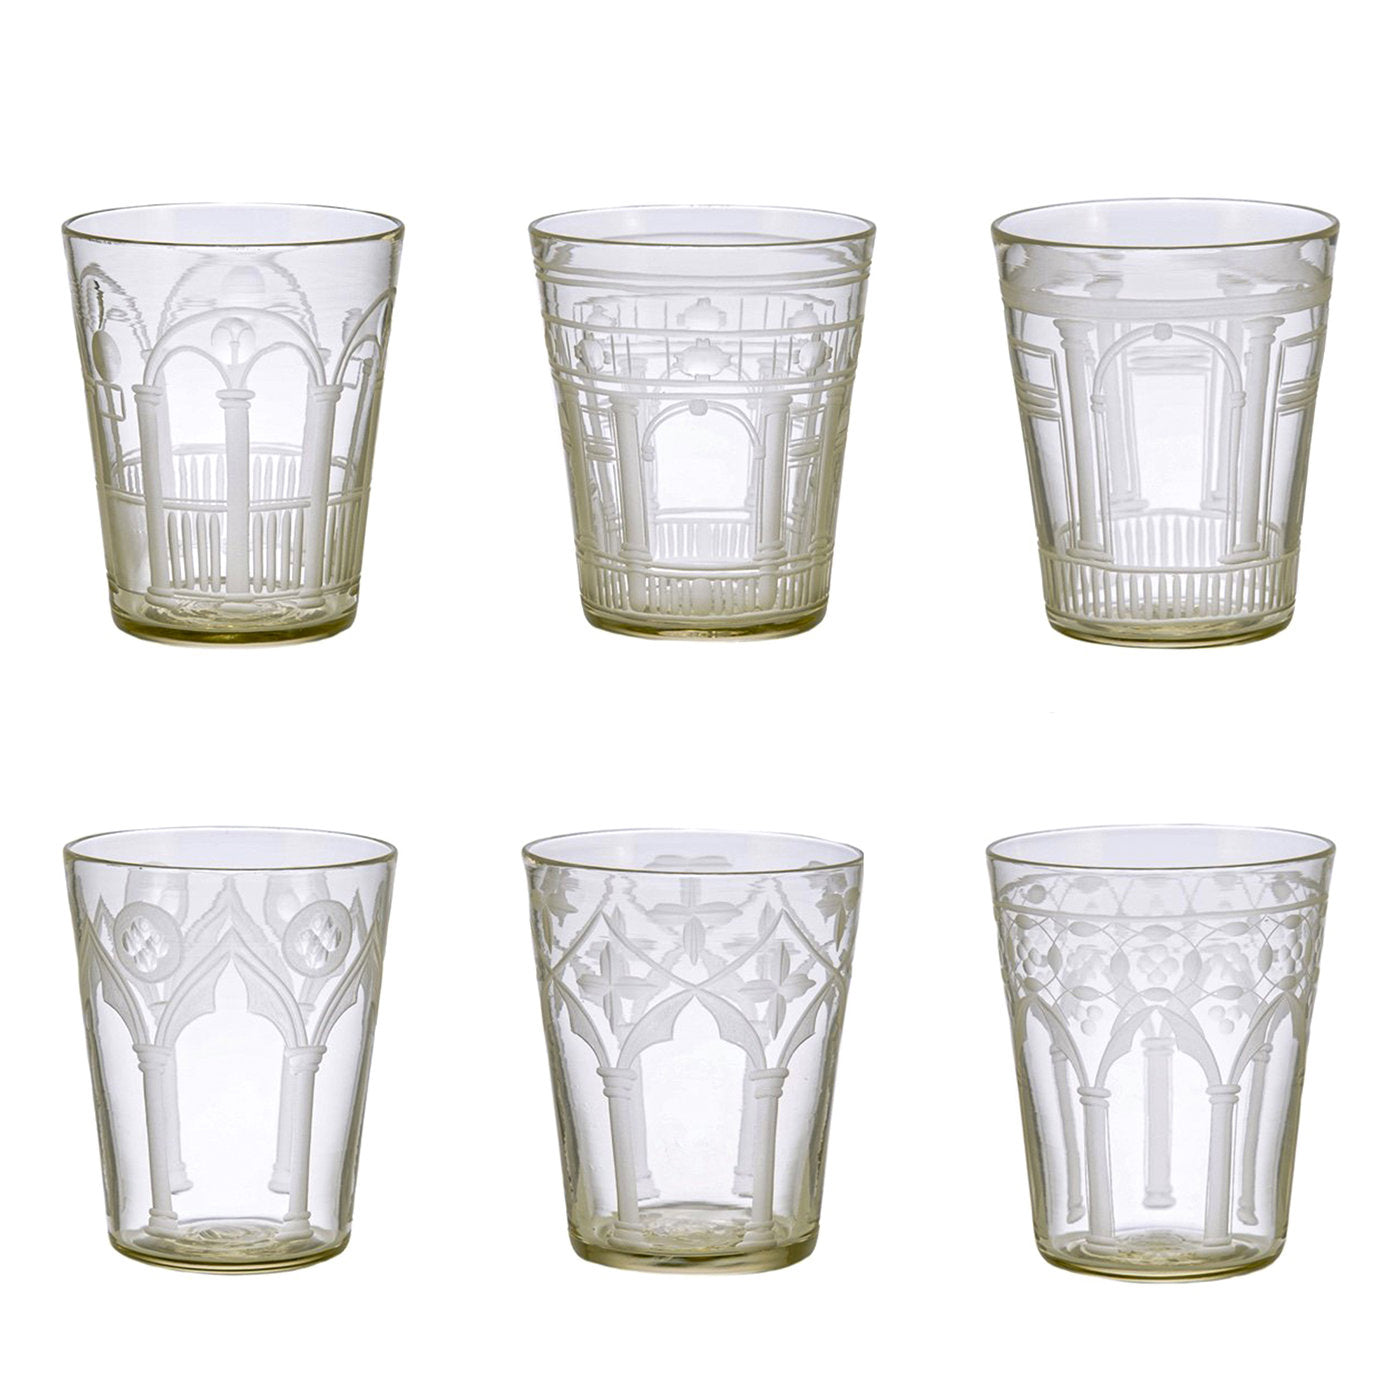 Set of 6 Antique Crystal Murano Palazzo Glasses - Alternative view 1